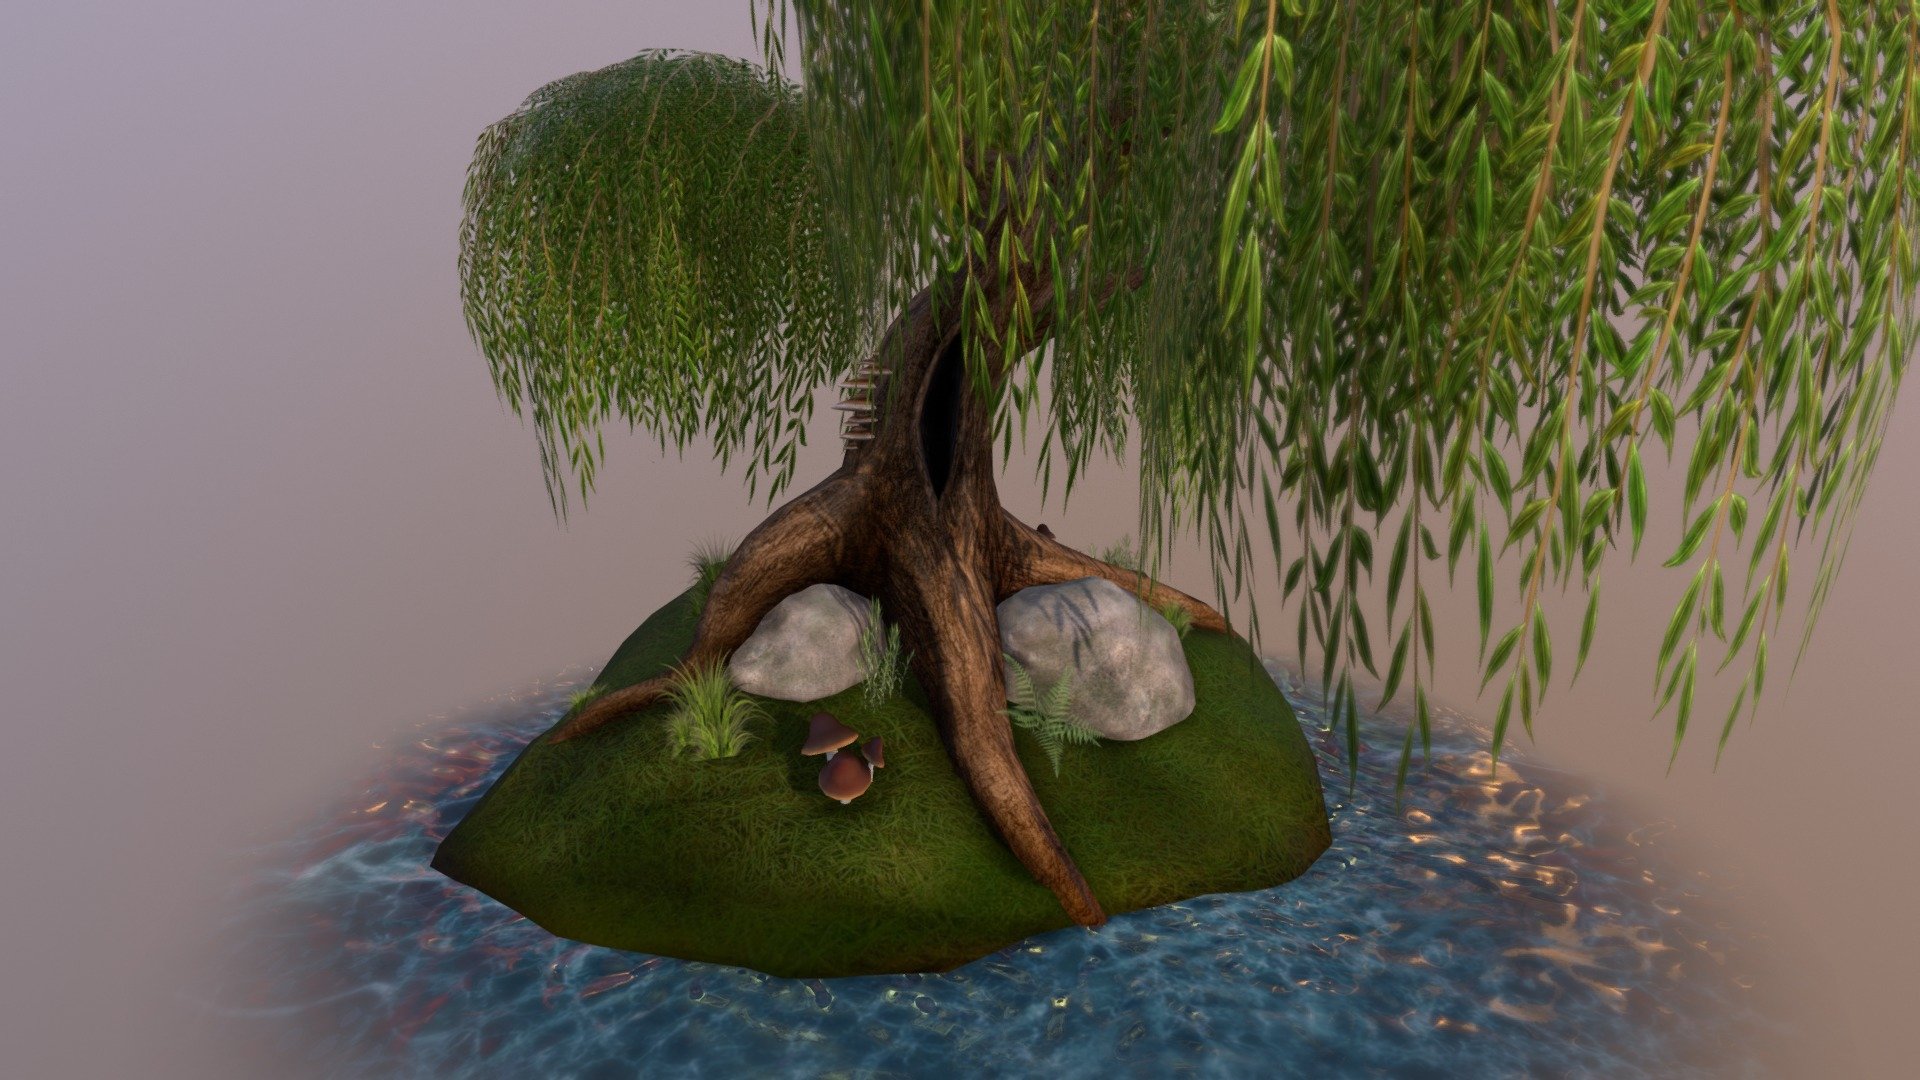 My first tree island created for a school project. 

Models made in 3DS Max and Mudbox. The textures are all made by hand except for the gras and farn 3d model